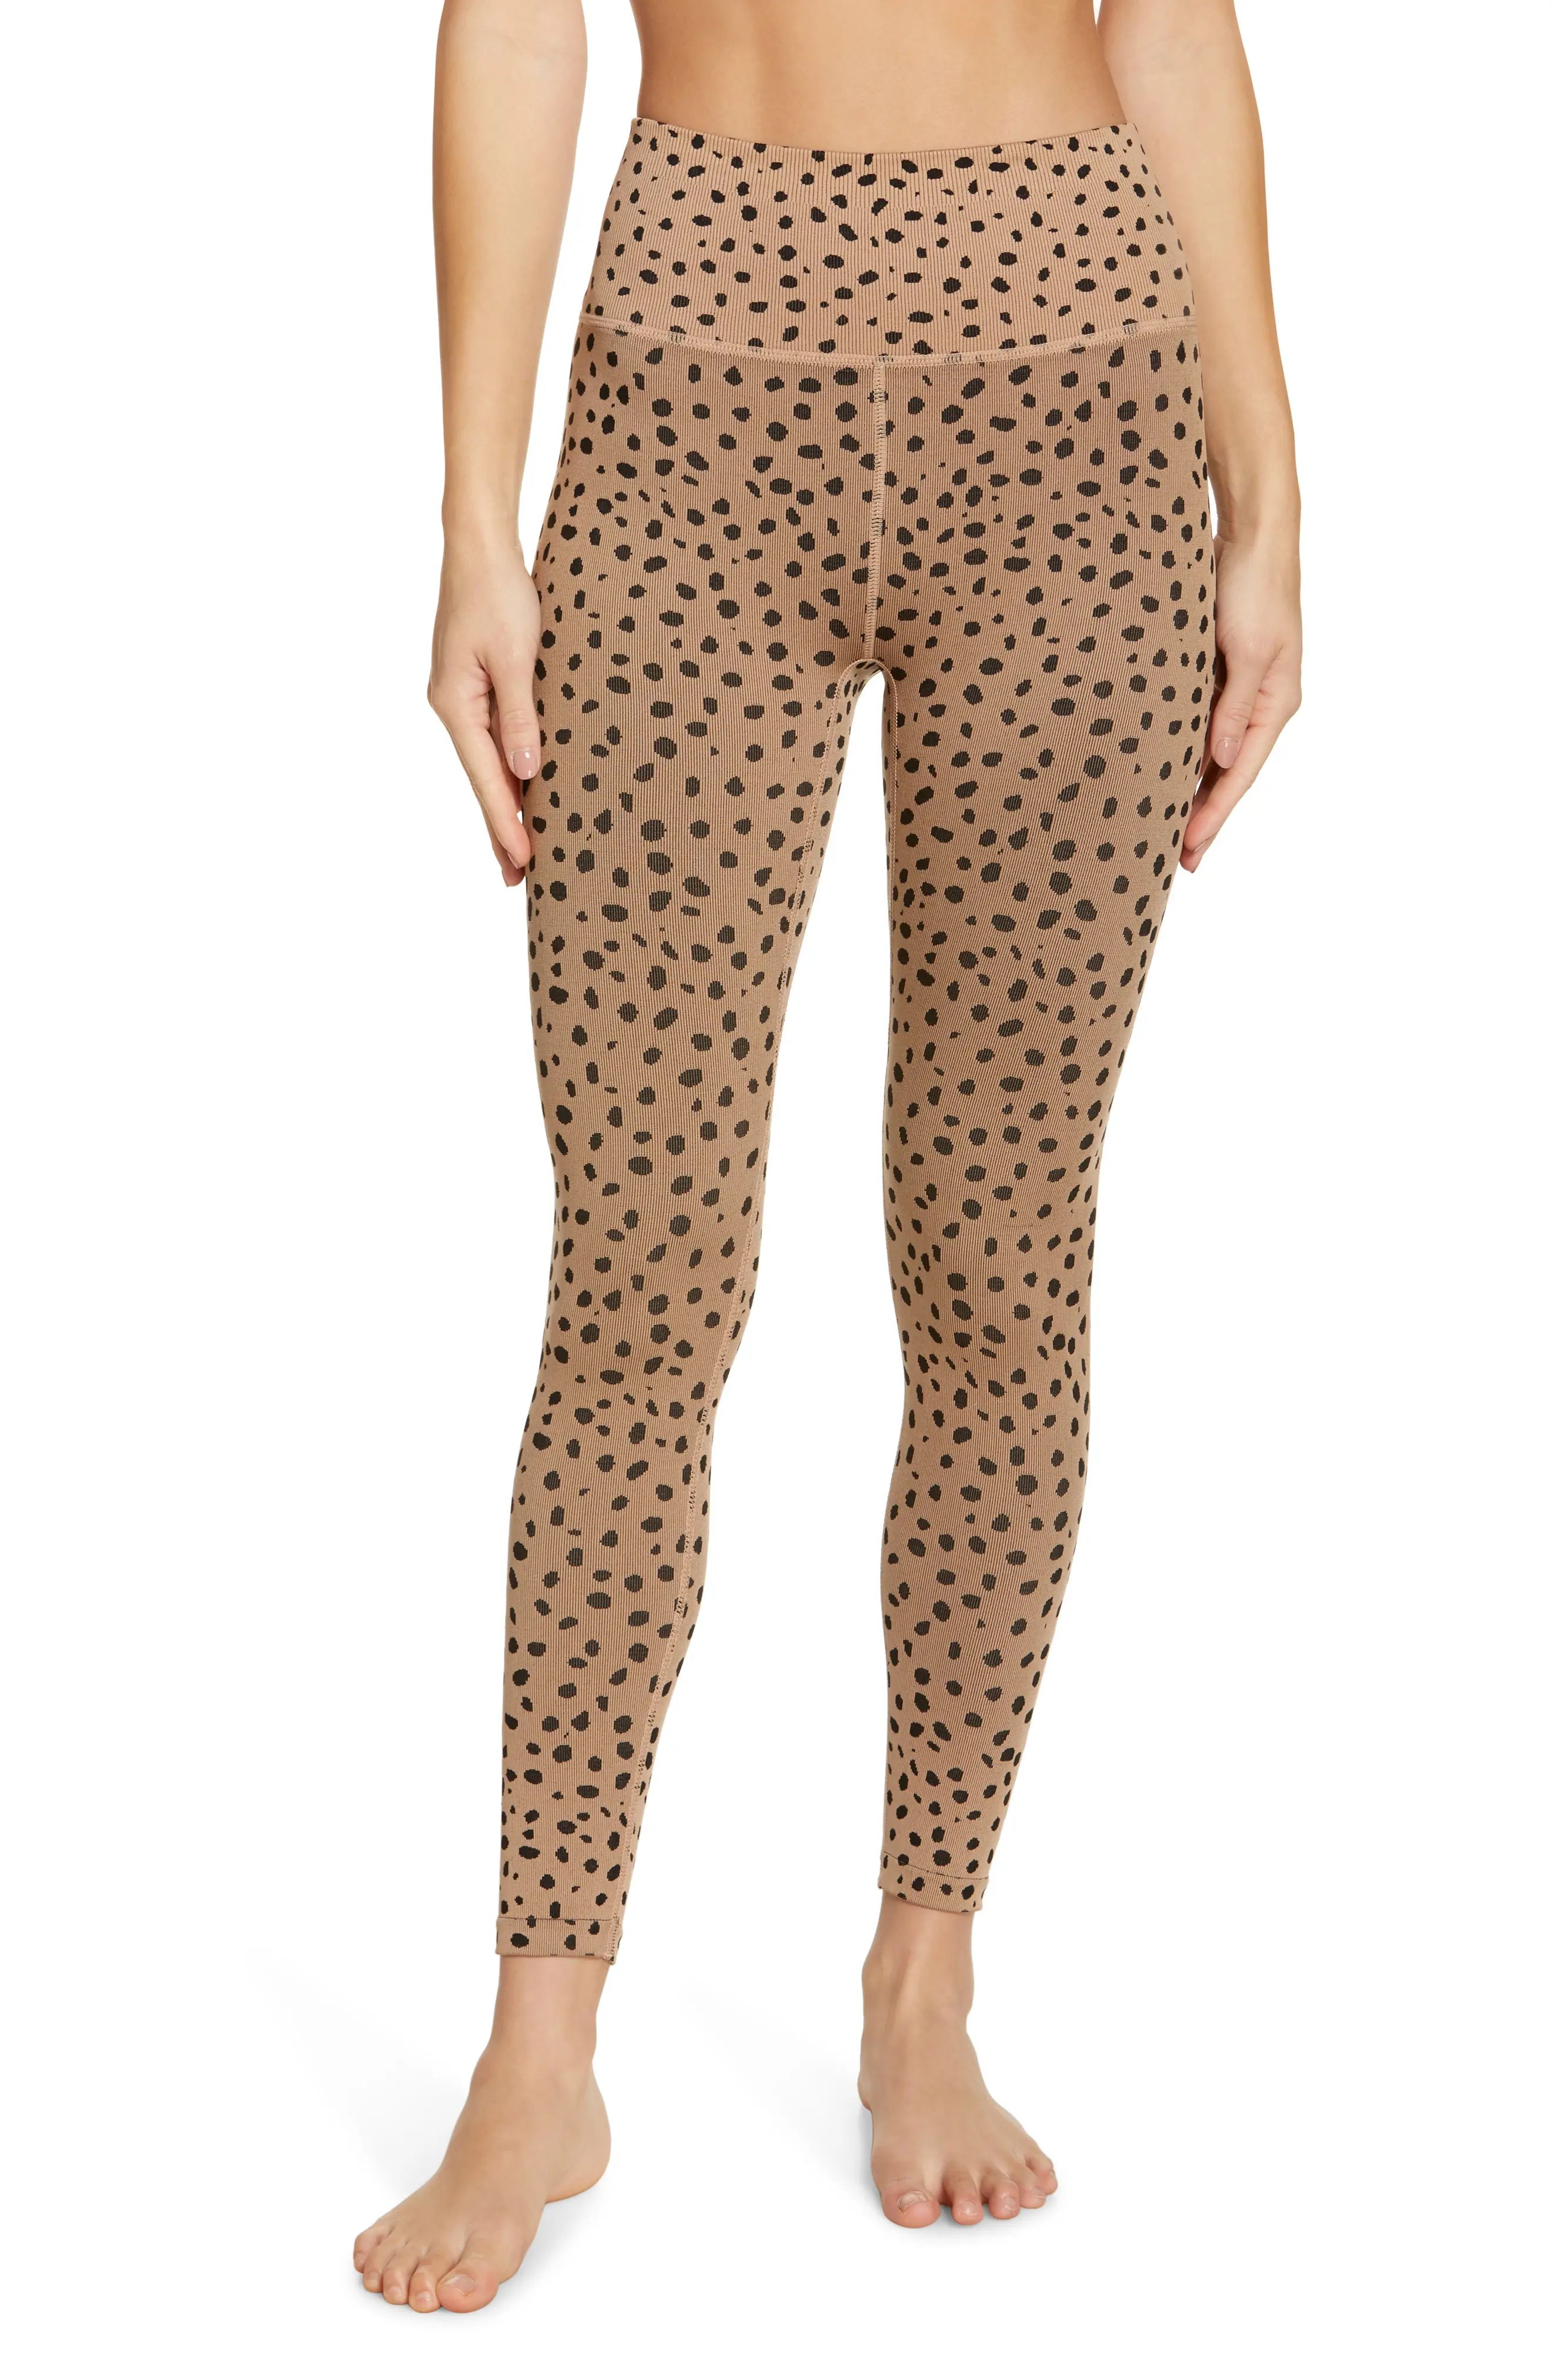 Zella Elevate High Waist Seamless Leggings in Tan Natural at Nordstrom, Size X-Small | Nordstrom